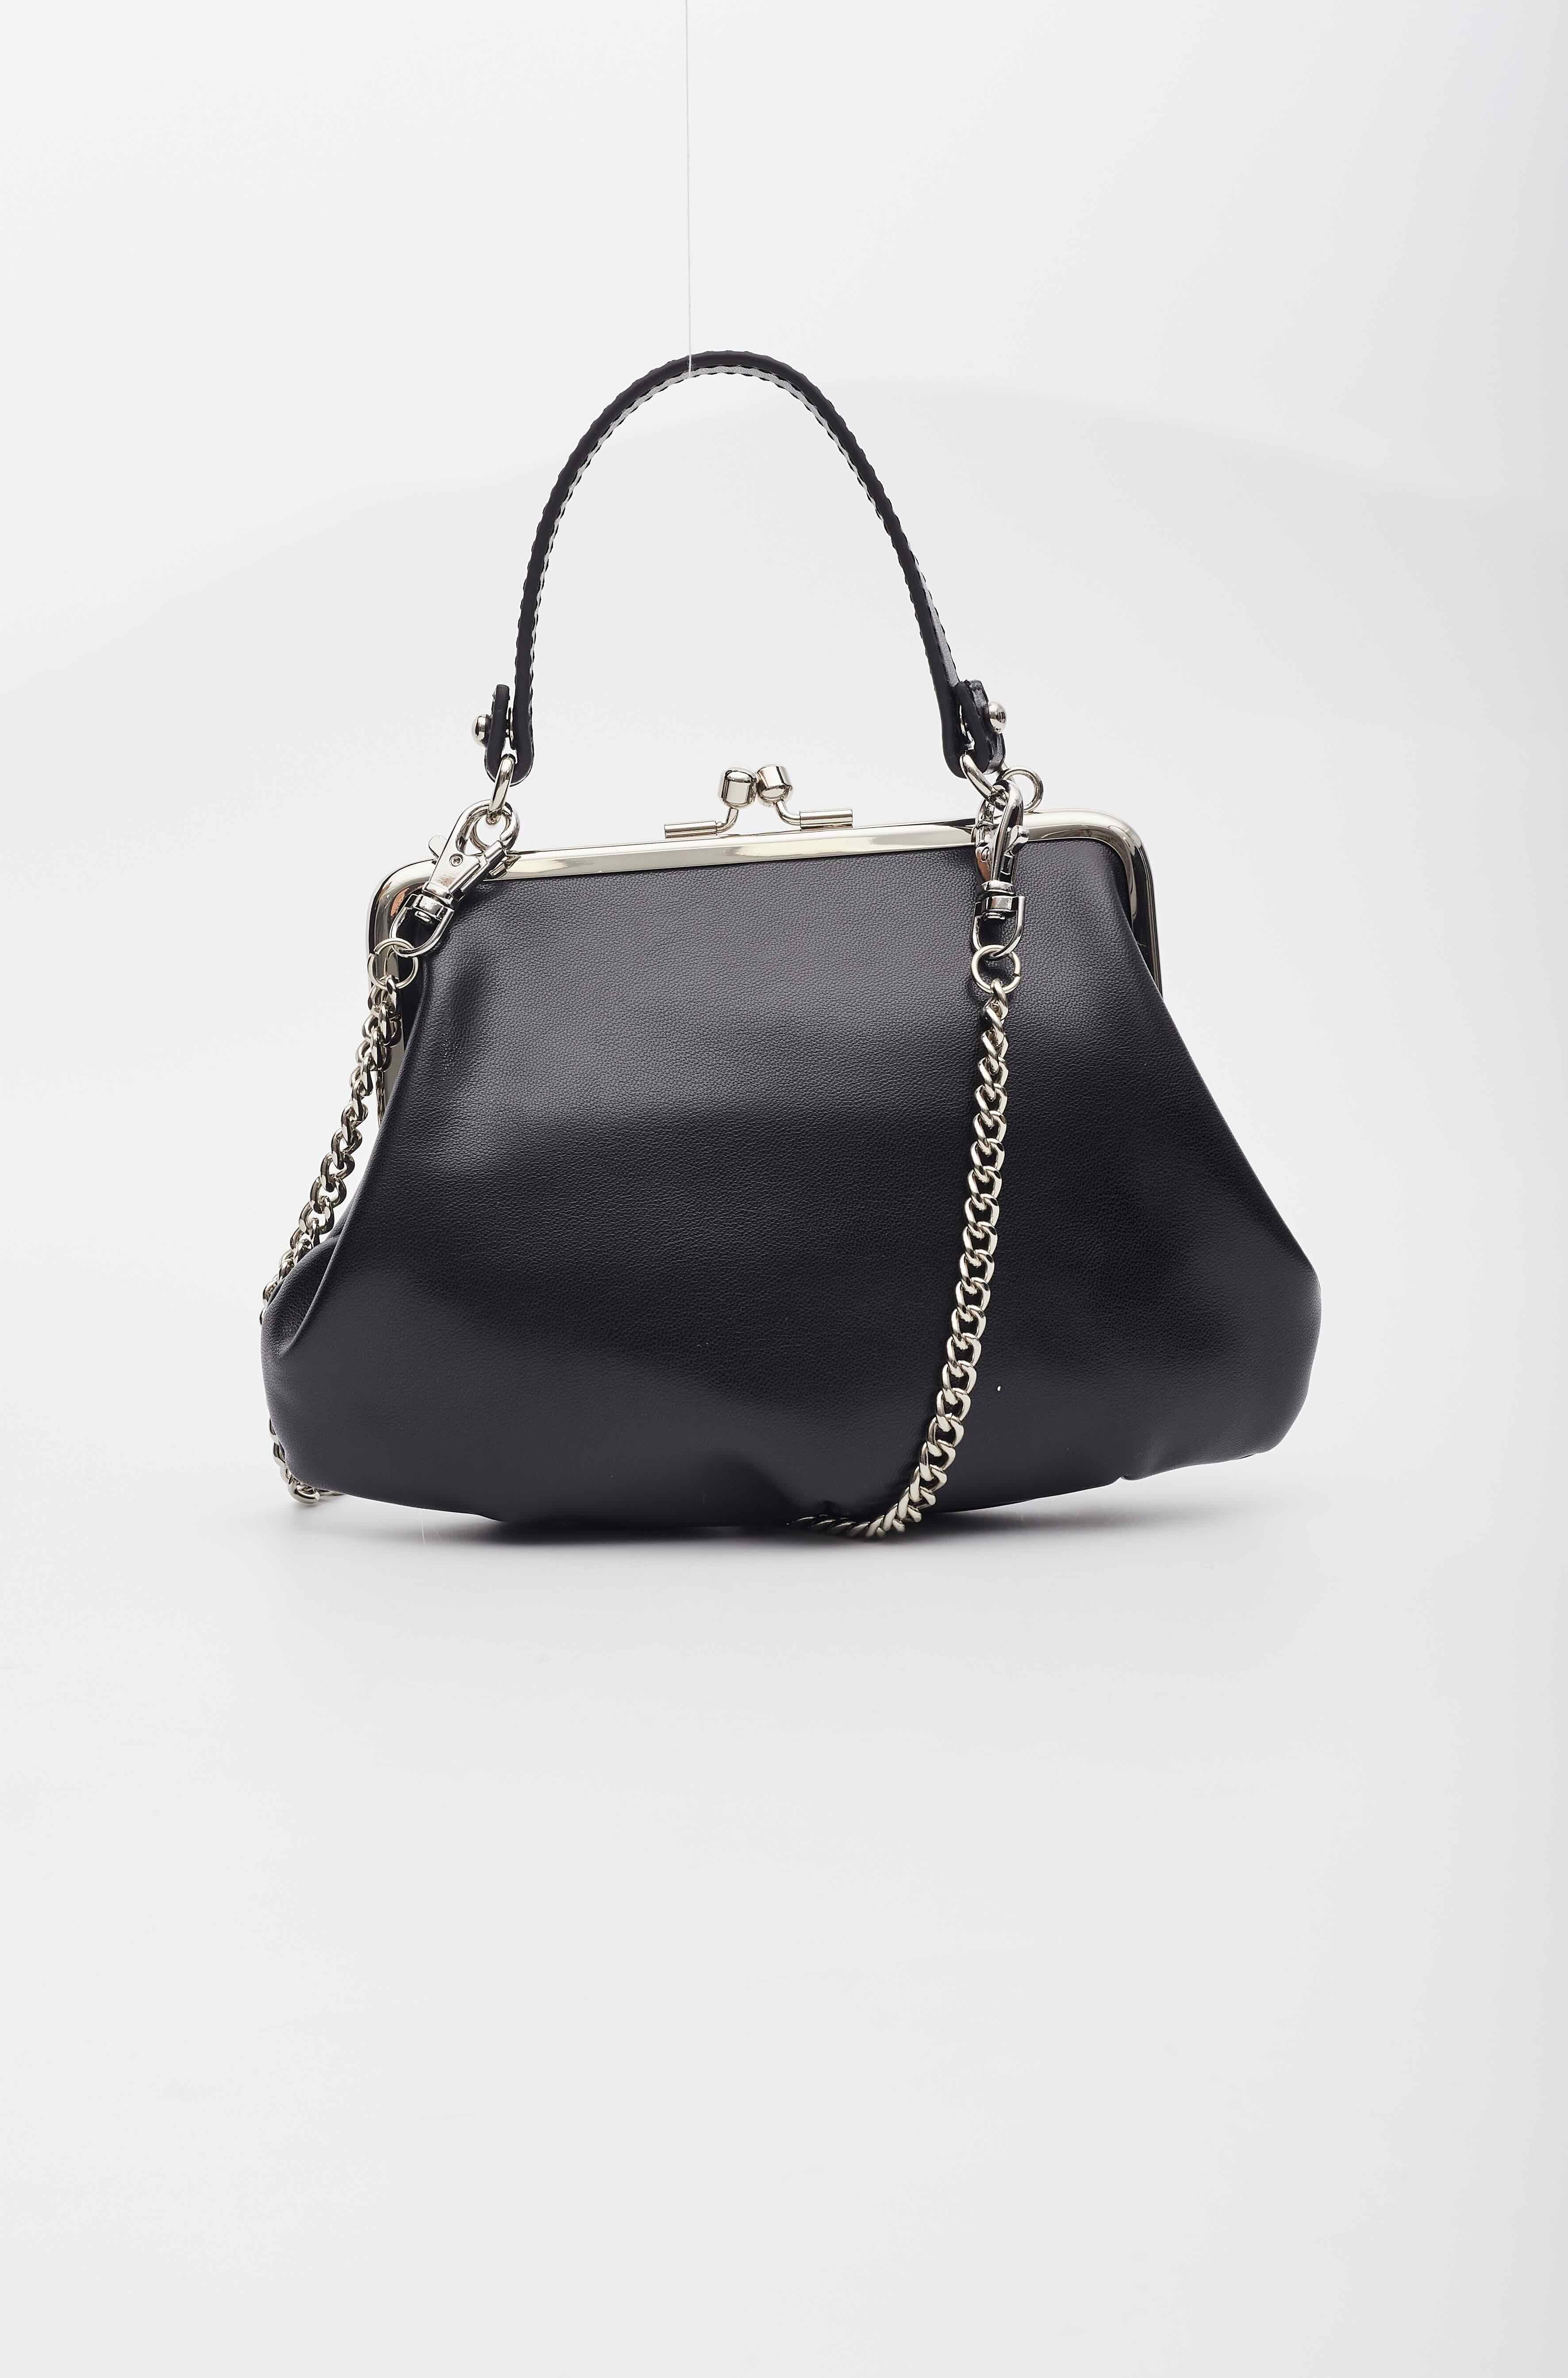 Black. Made from nappa leather. Silver hardware. Signature Orb plaque detail. Clasp fastening. Main compartment with logo cotton lining. Long top handle Detachable chain-link shoulder strap.

Material: Leather
Measures: Height 4.7” x Length 6.7” x